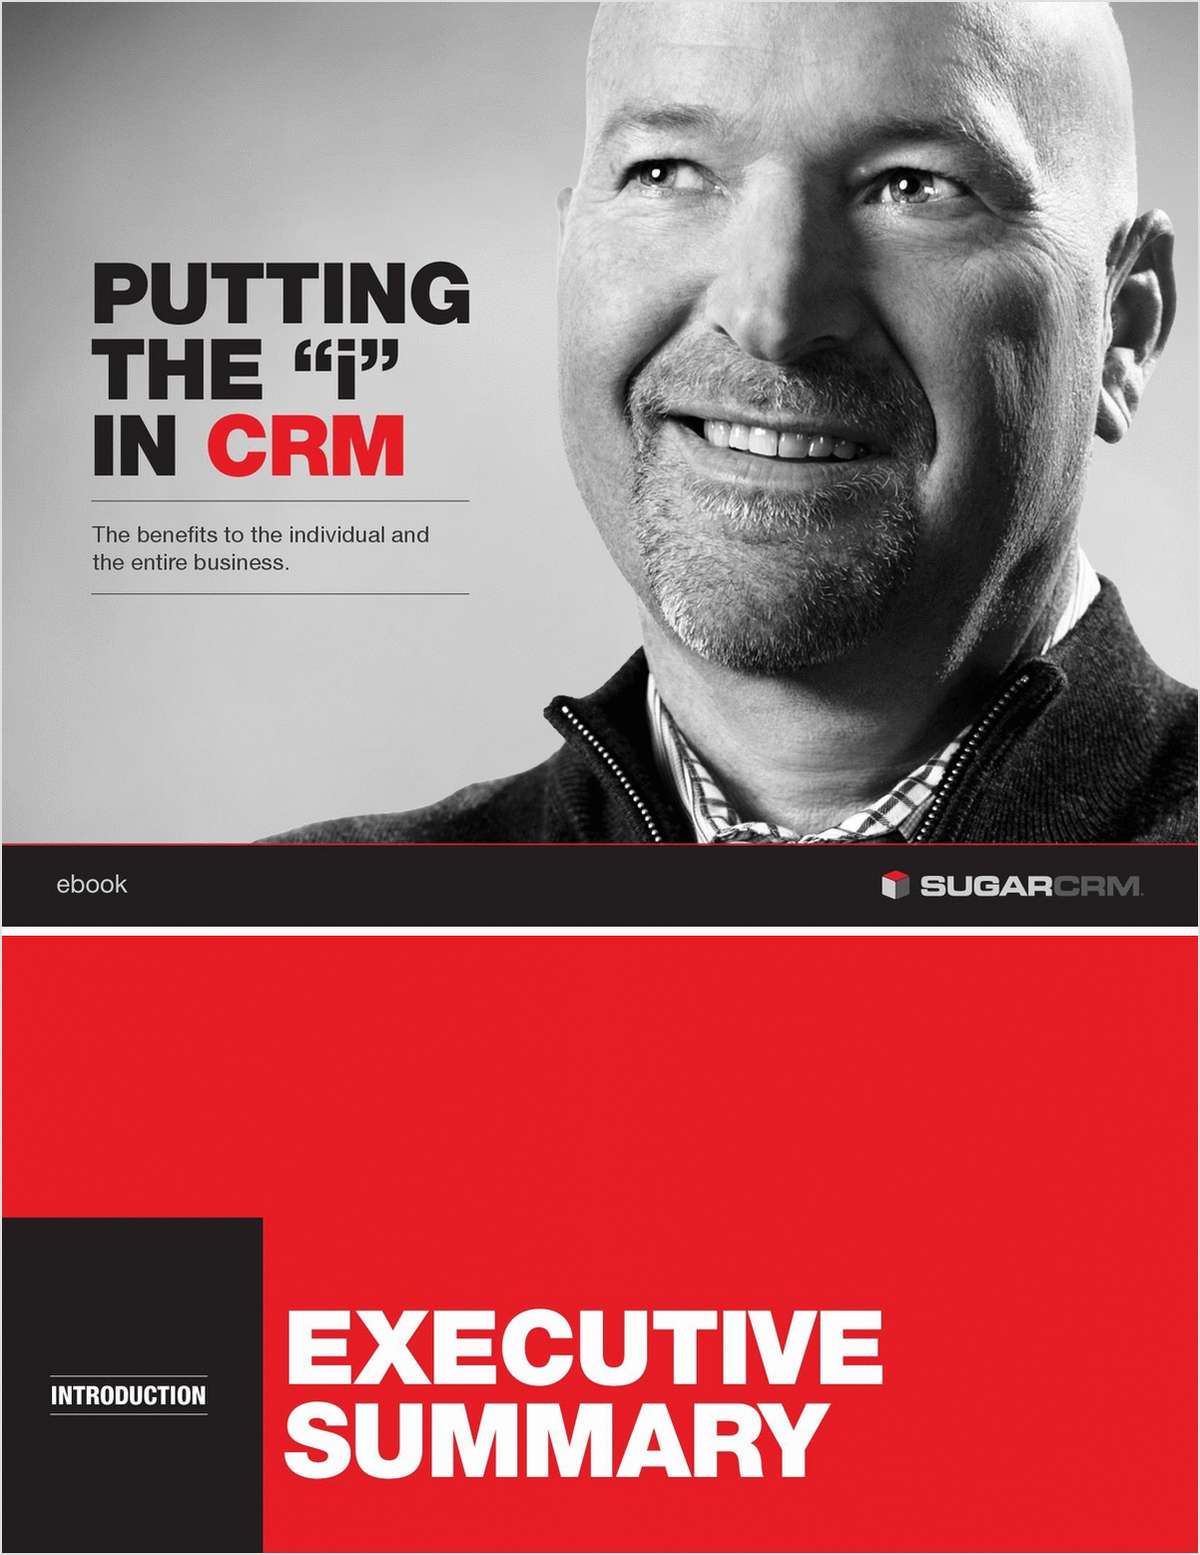 Delivering the True Potential of CRM Through the Individual